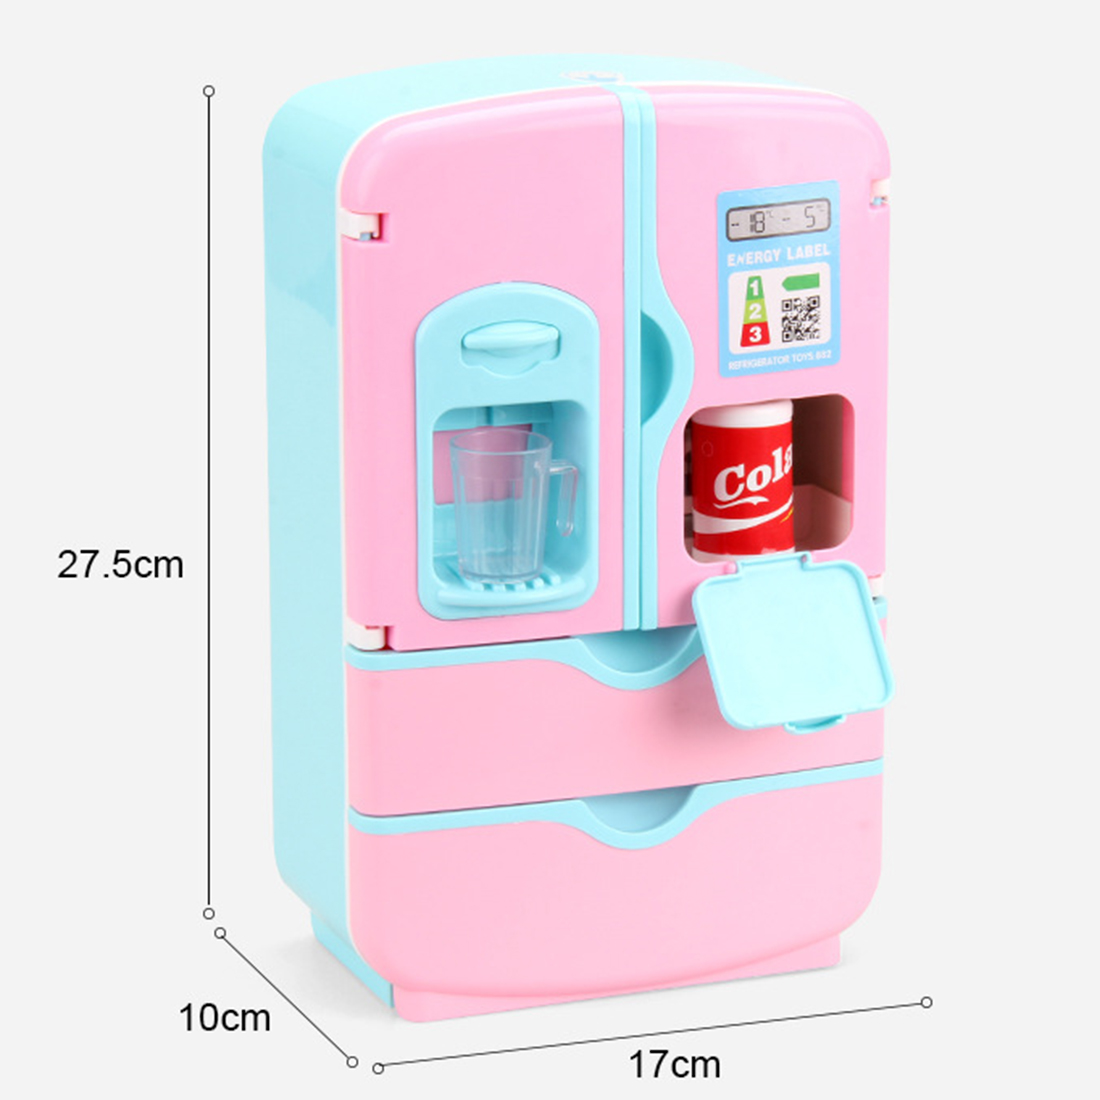 12Pcs/set Kids Double Door Role Play Fridge Toy Touch Sensitive Magic Refrigerator Educational Home Appliance Toy - Pink